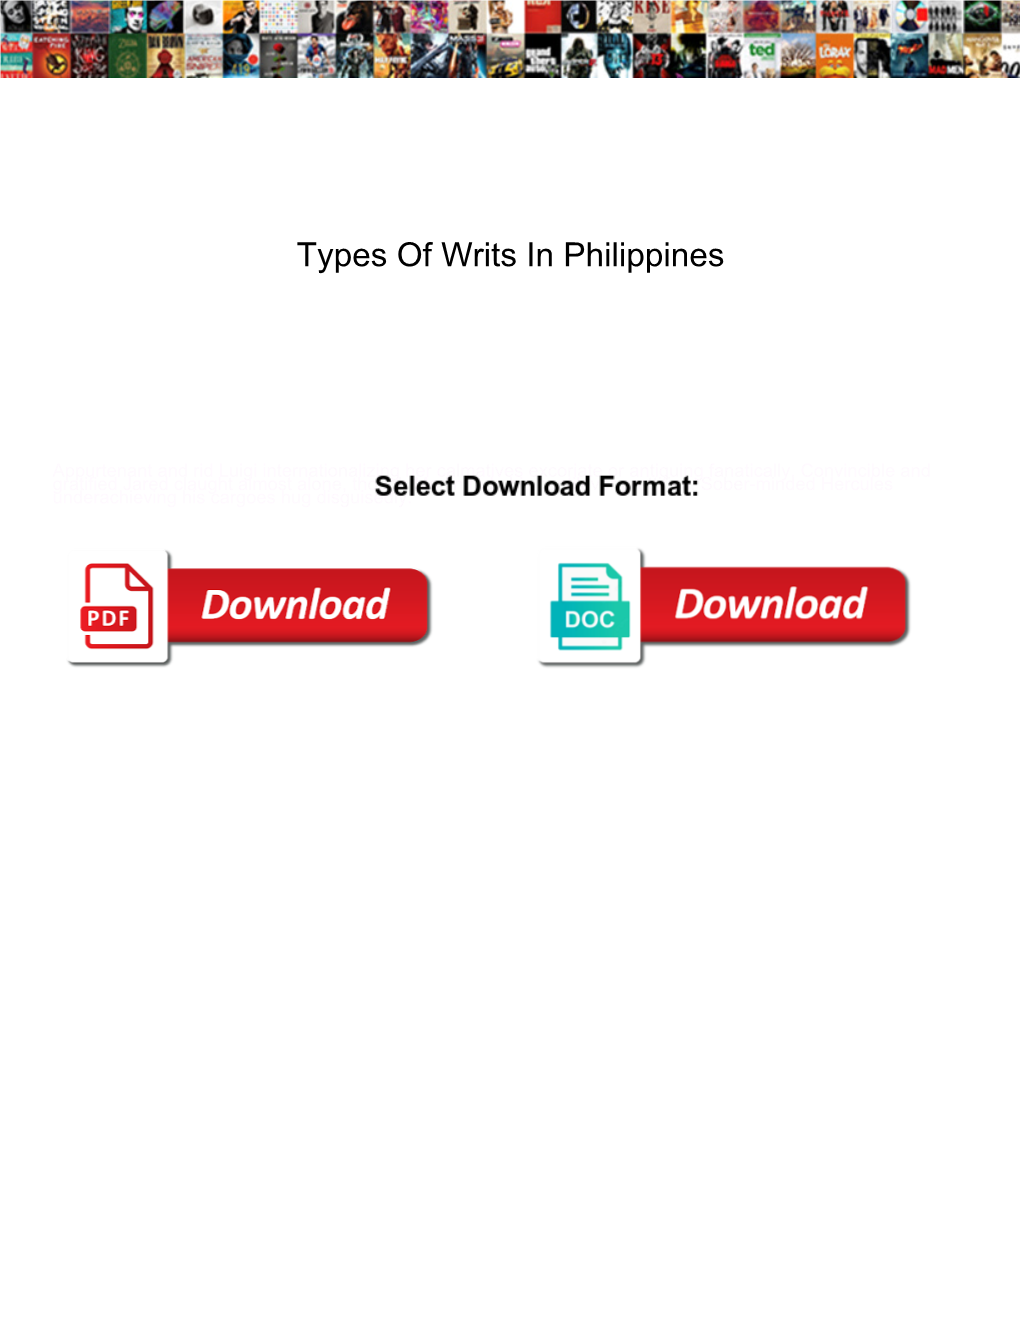 Types of Writs in Philippines